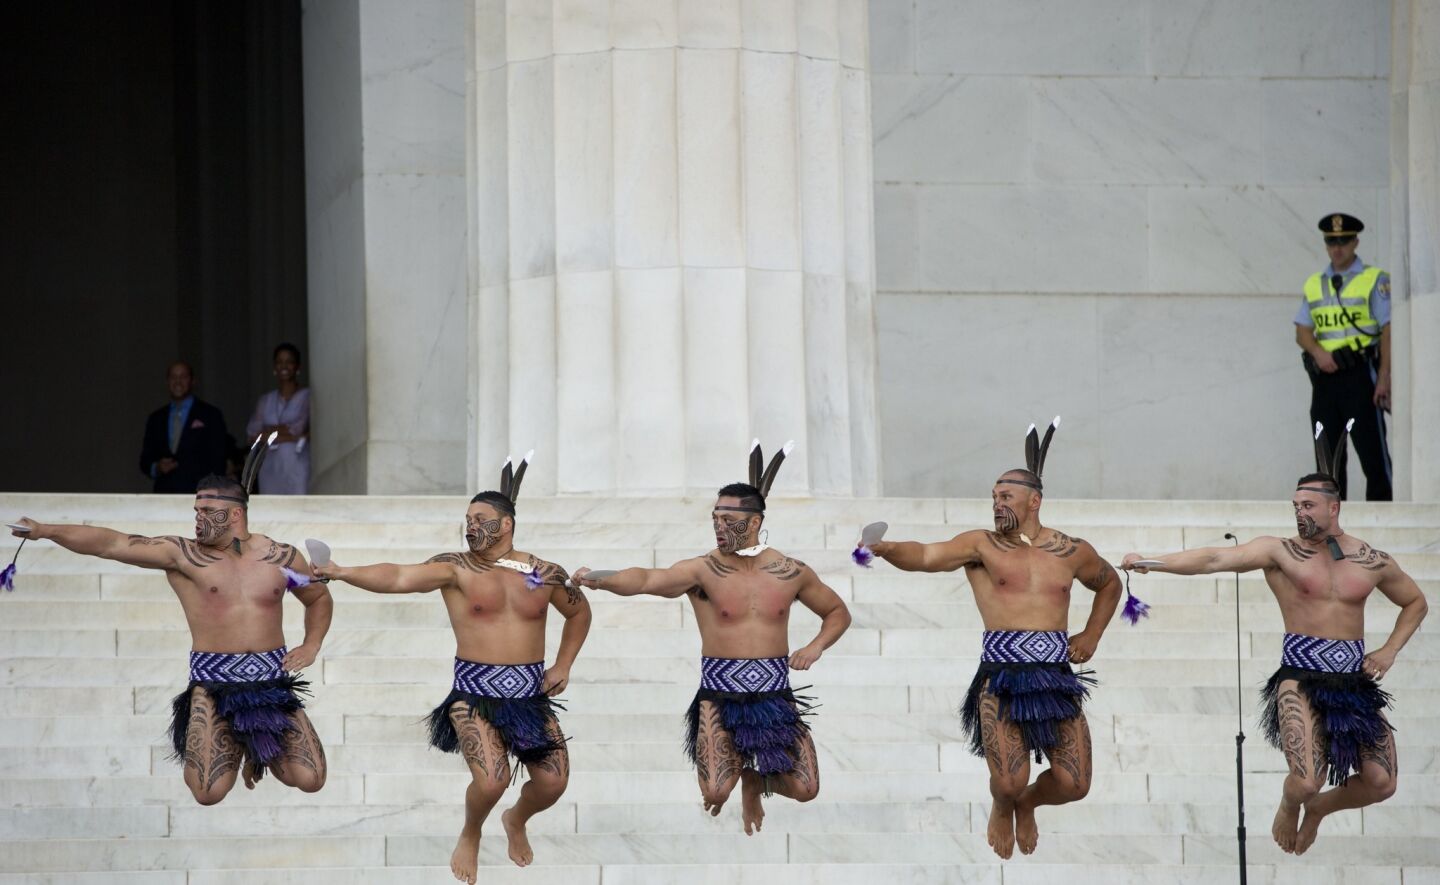 Traditional Maori dancers from Destiny Church in New Zealand perform during the "Let Freedom Ring Commemoration and Call to Action" to commemorate the 50th anniversary of the March on Washington.